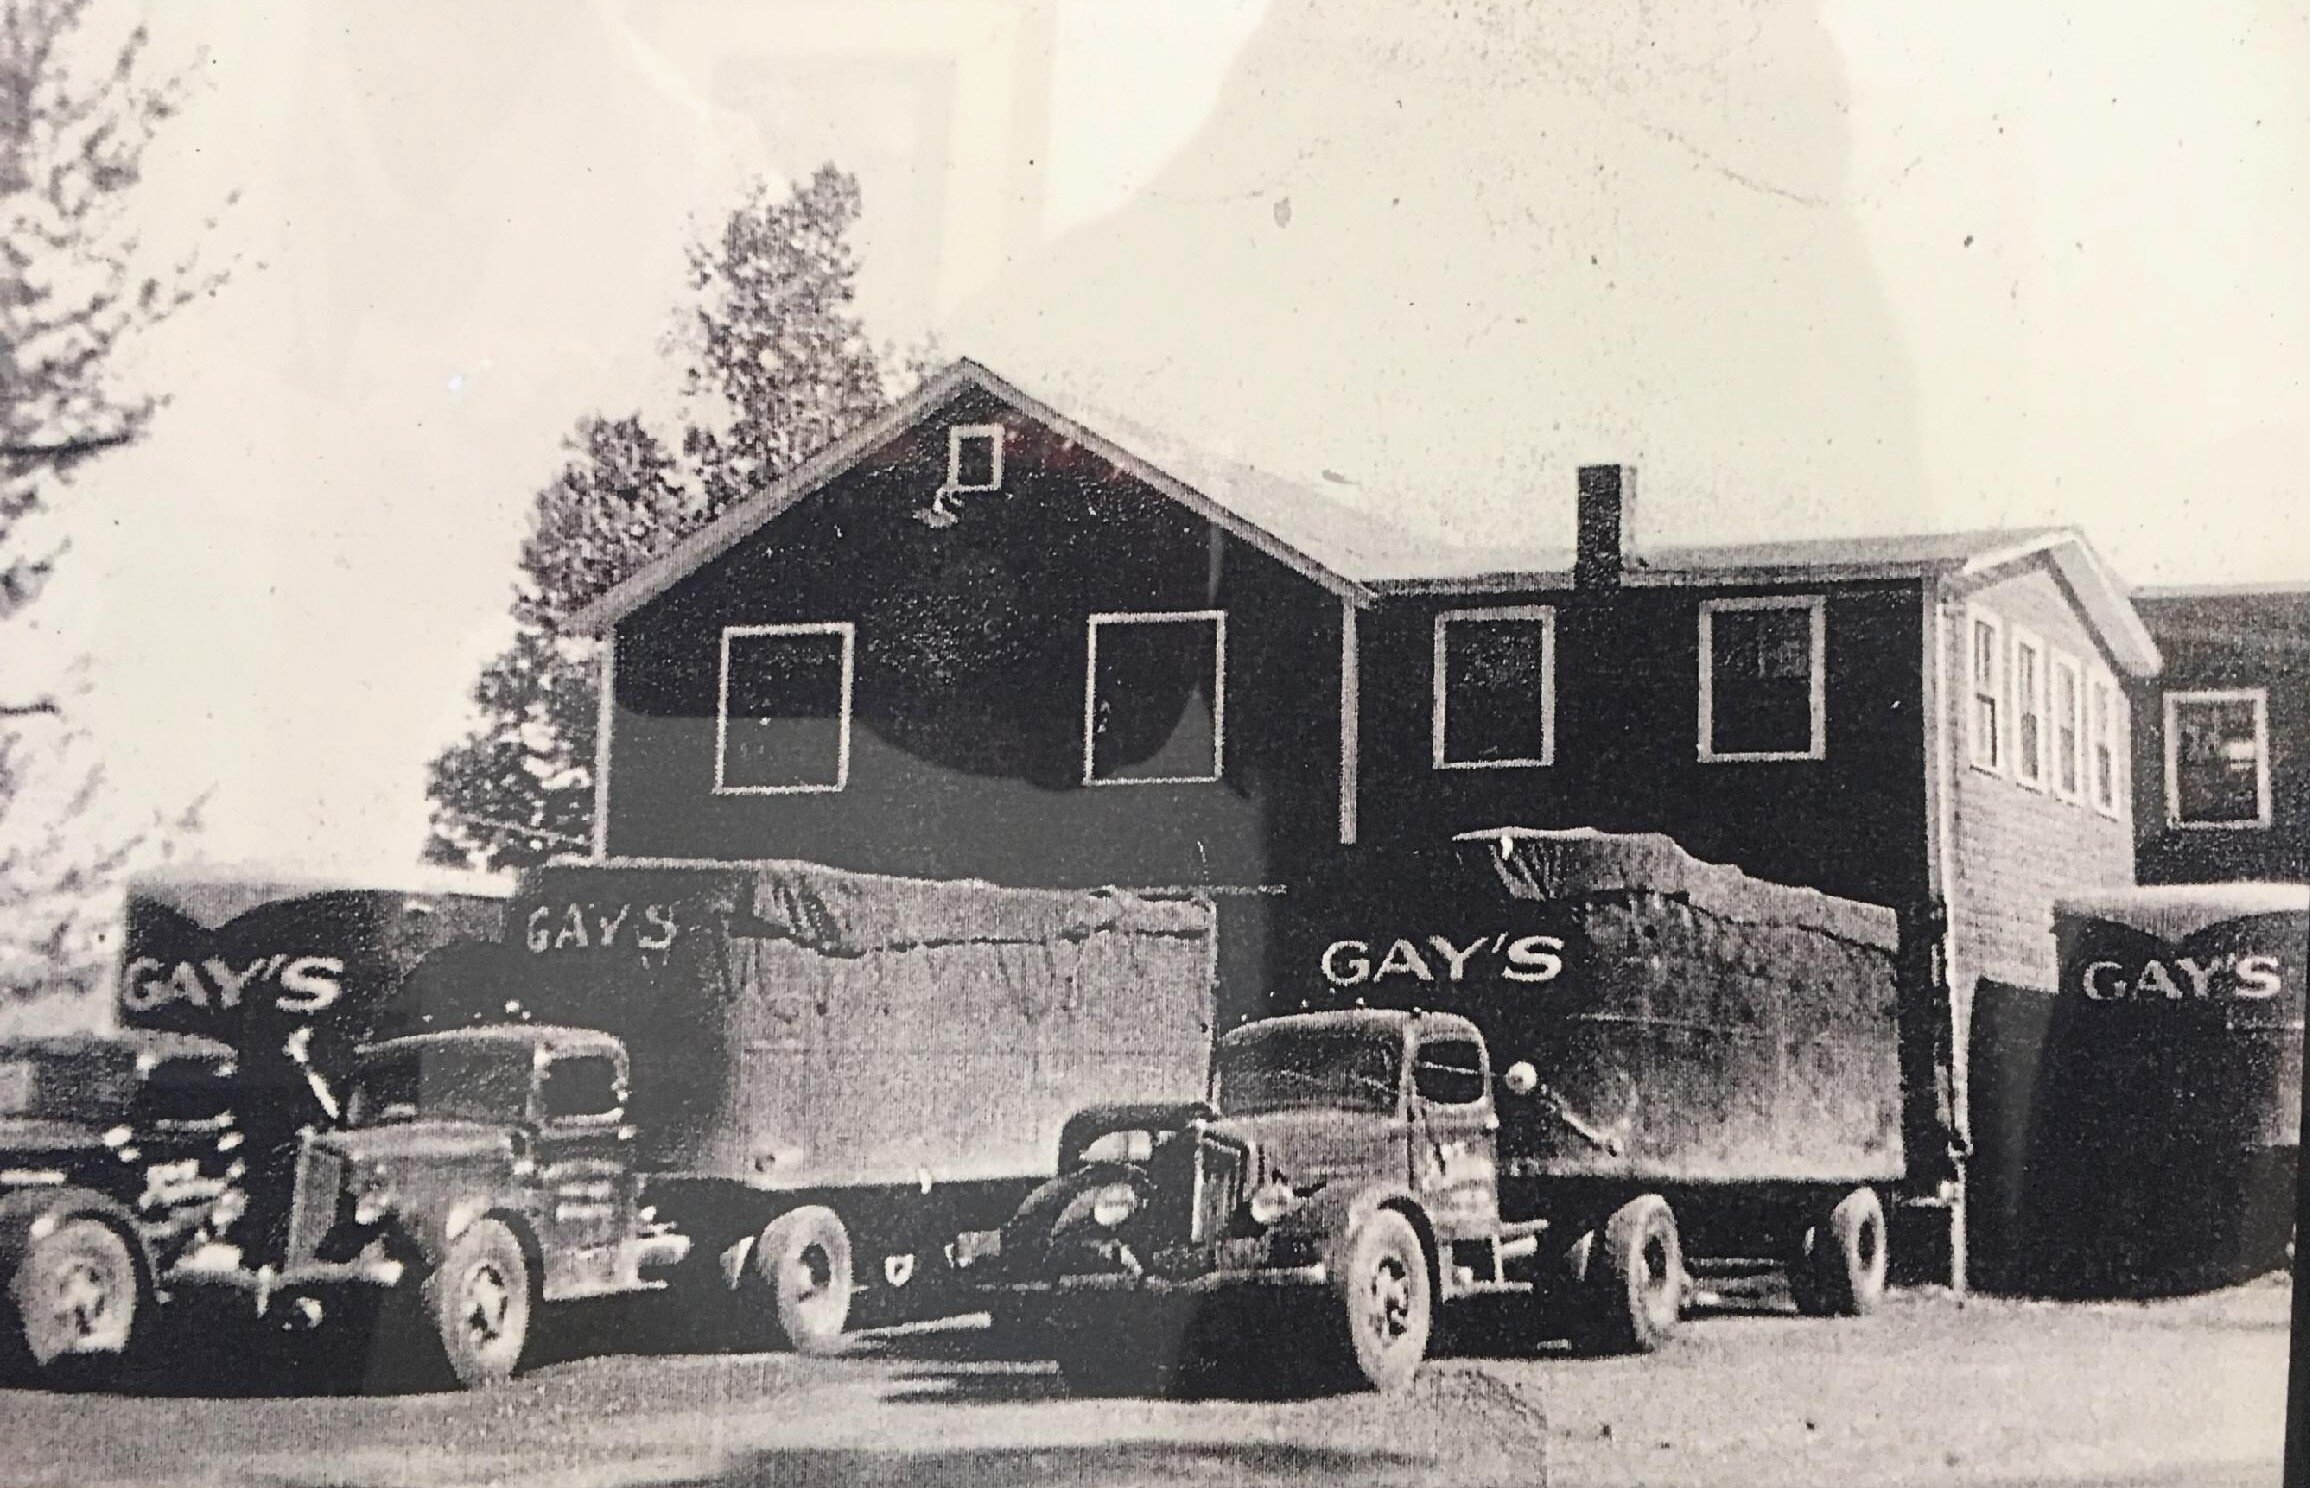  This photo is in Bellows Falls, VT.  Grandpa Robert Gay began hauling Freight from Randolph, Vermont to Springfield Massachusetts, but the trips became too long and that is how he ended up in Bellows Falls Vermont. 